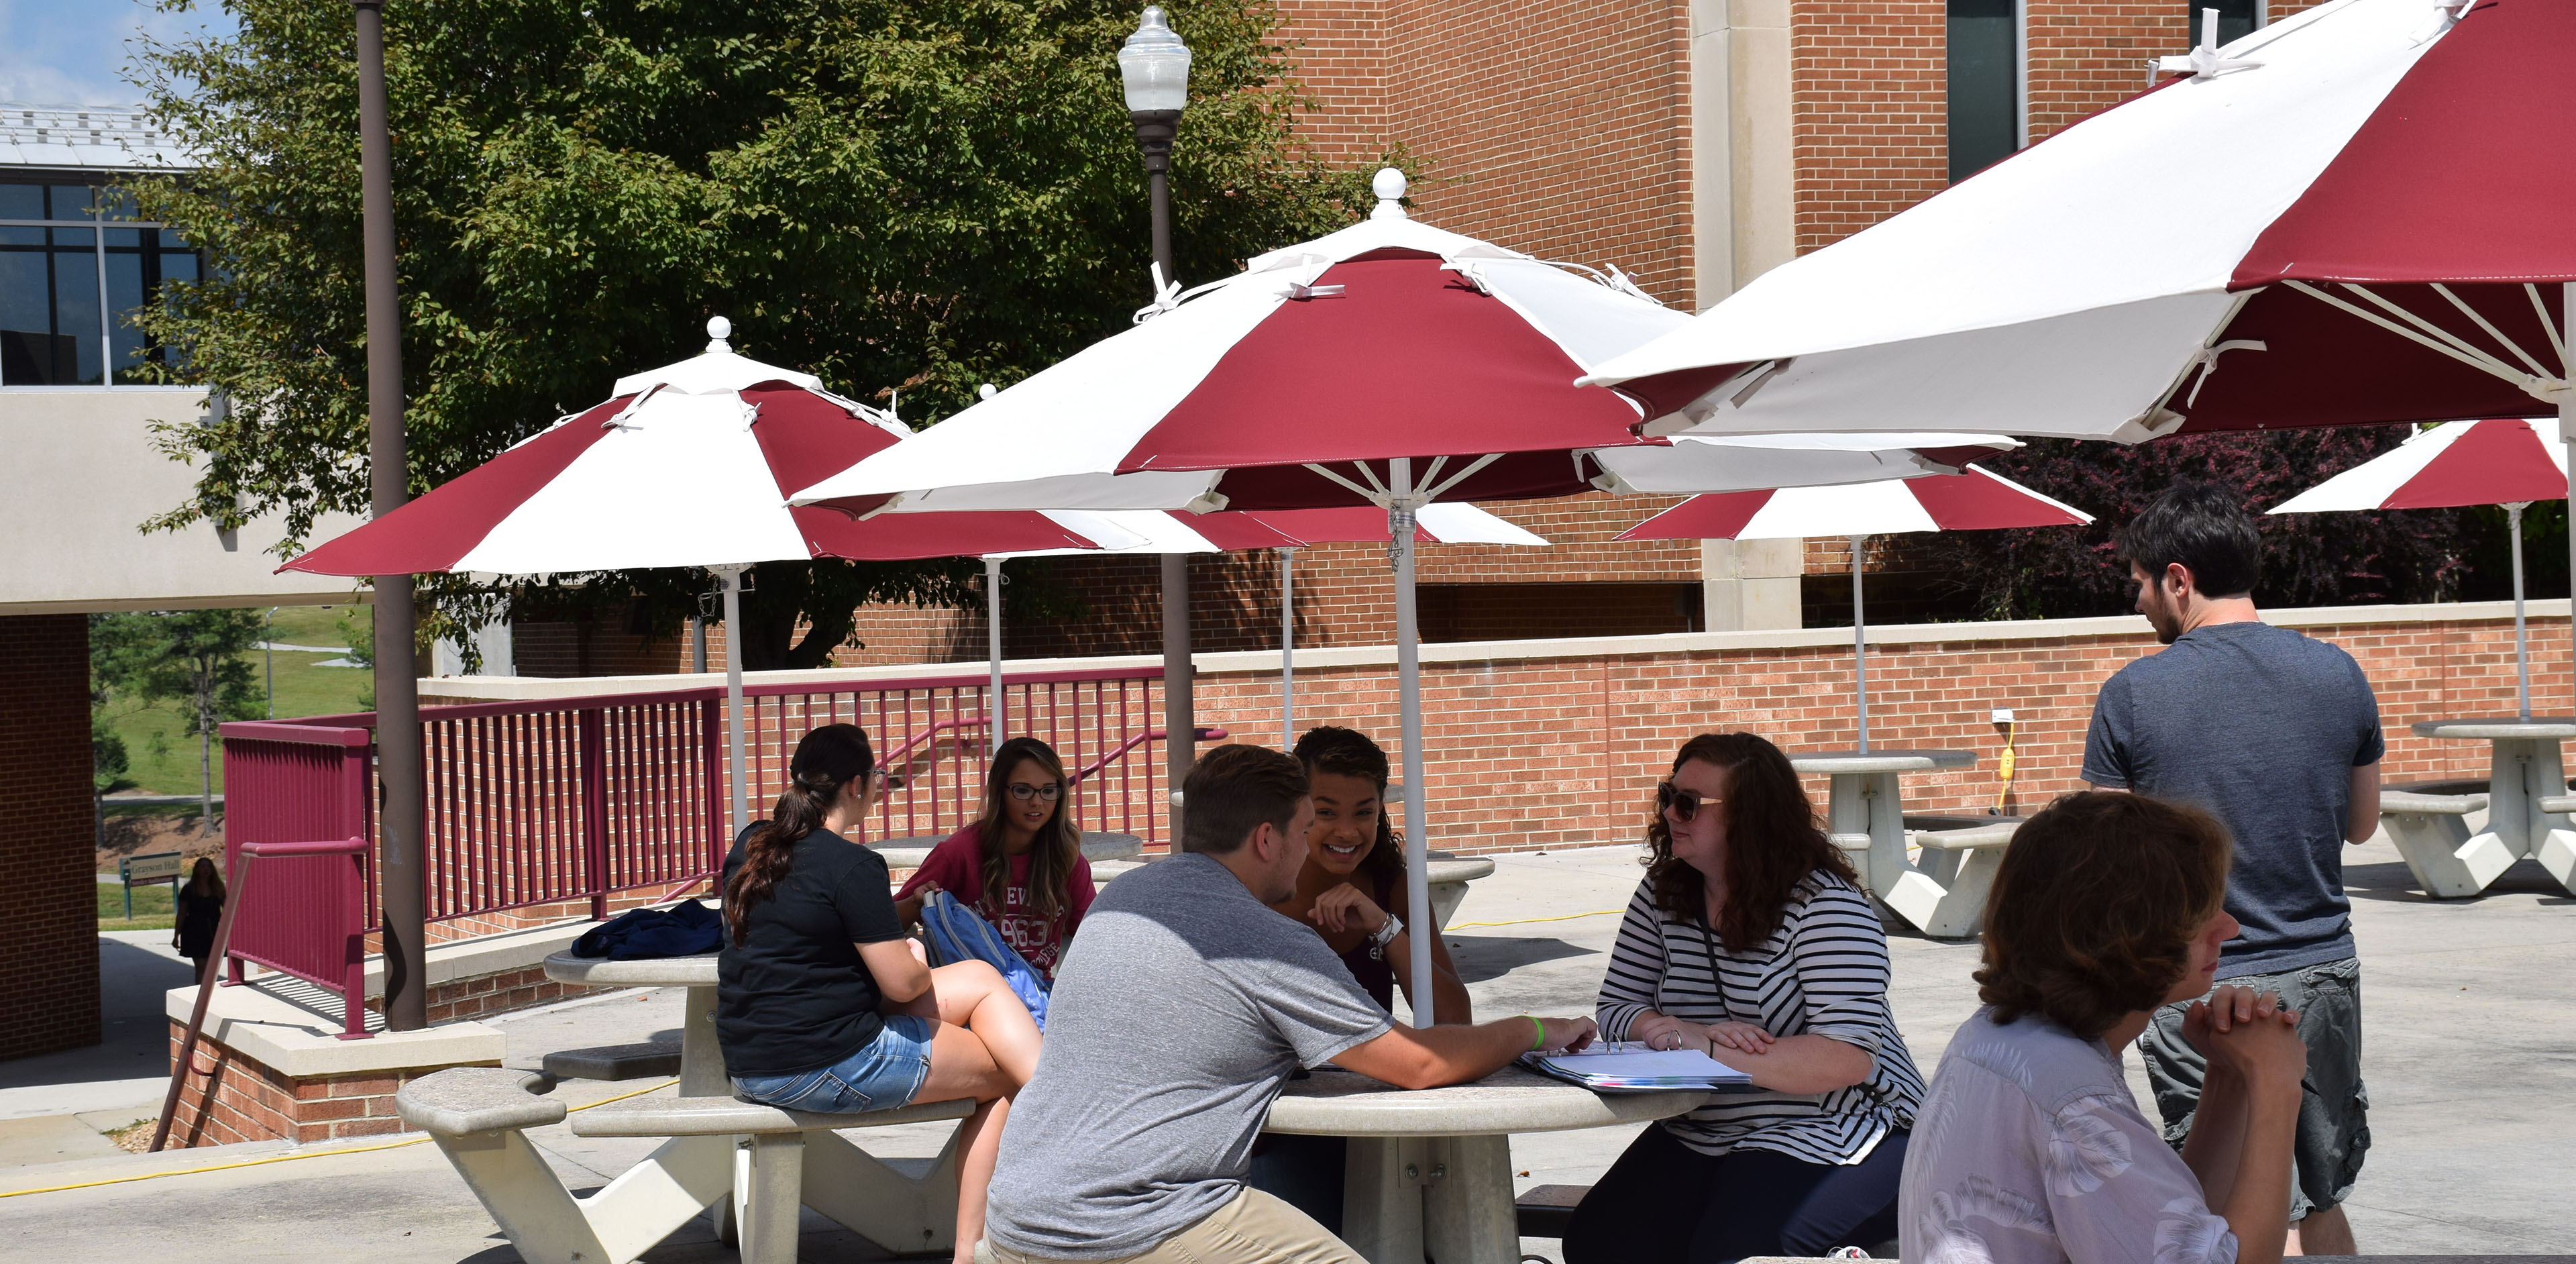 Students sitting together at the picnic tables in the courtyard